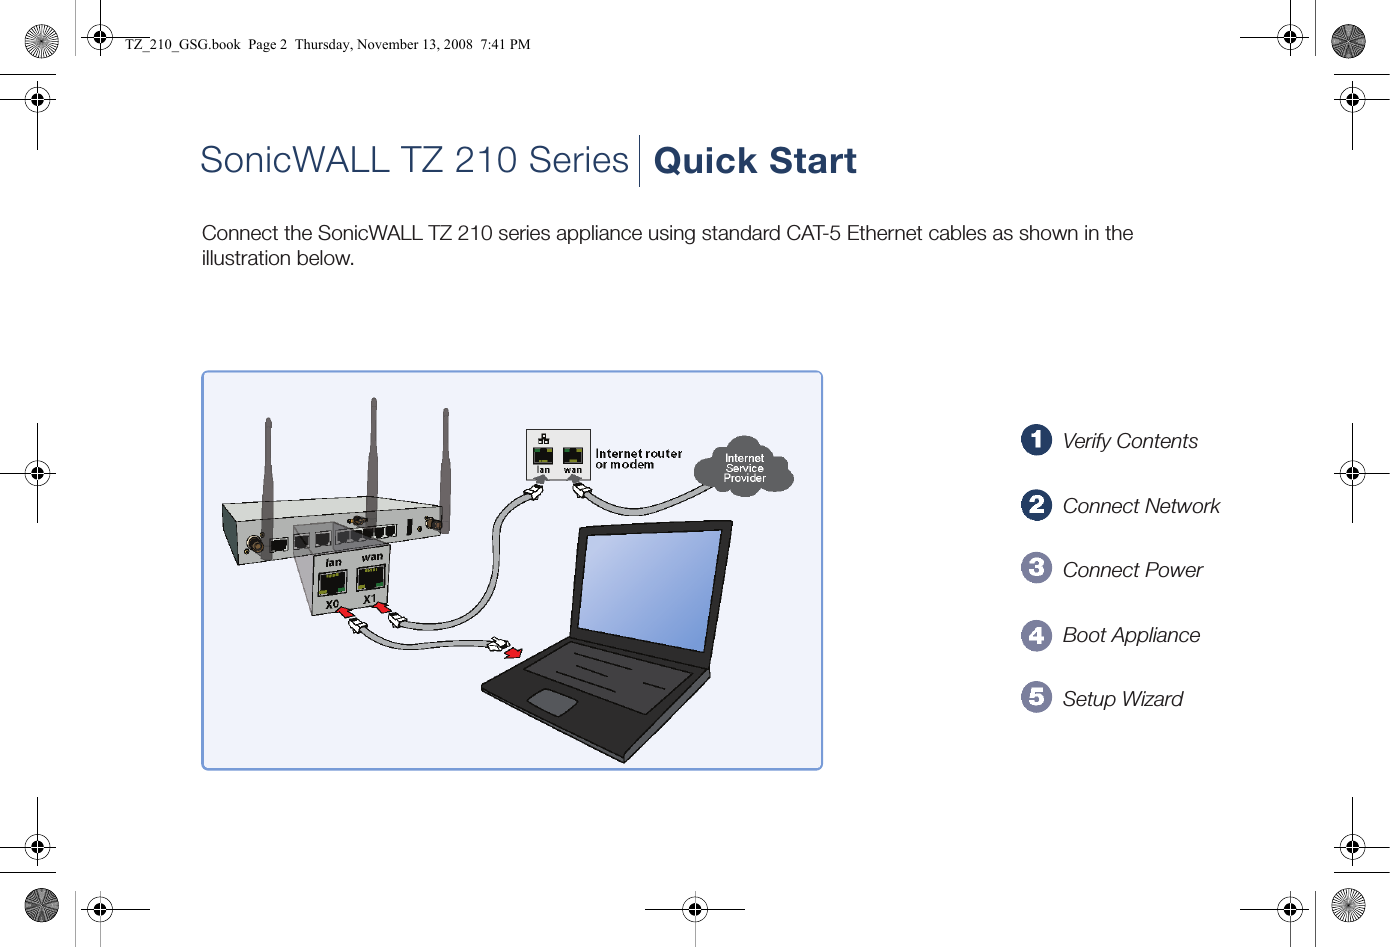 SonicWALL TZ 210 Series Quick StartConnect the SonicWALL TZ 210 series appliance using standard CAT-5 Ethernet cables as shown in the illustration below.Verify ContentsConnect NetworkConnect PowerBoot ApplianceSetup WizardTZ_210_GSG.book  Page 2  Thursday, November 13, 2008  7:41 PM